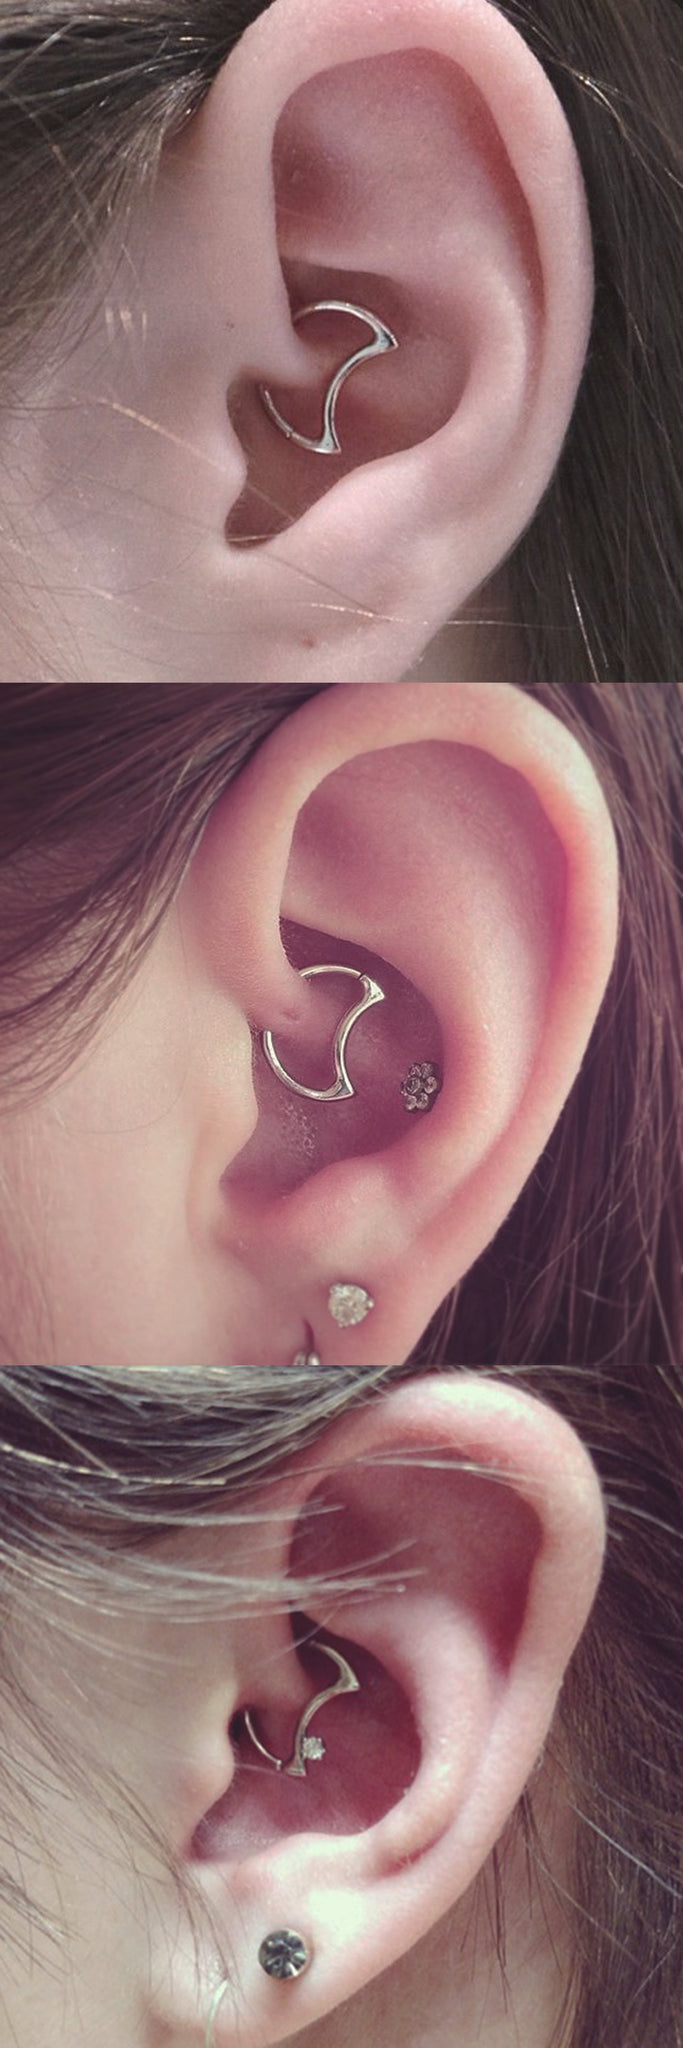 Unique and Cool Multiple Ear Piercing Combination Ideas - Crystal Moon Daith Rook Earring Jewelry Silver Gold at MyBodiArt.com